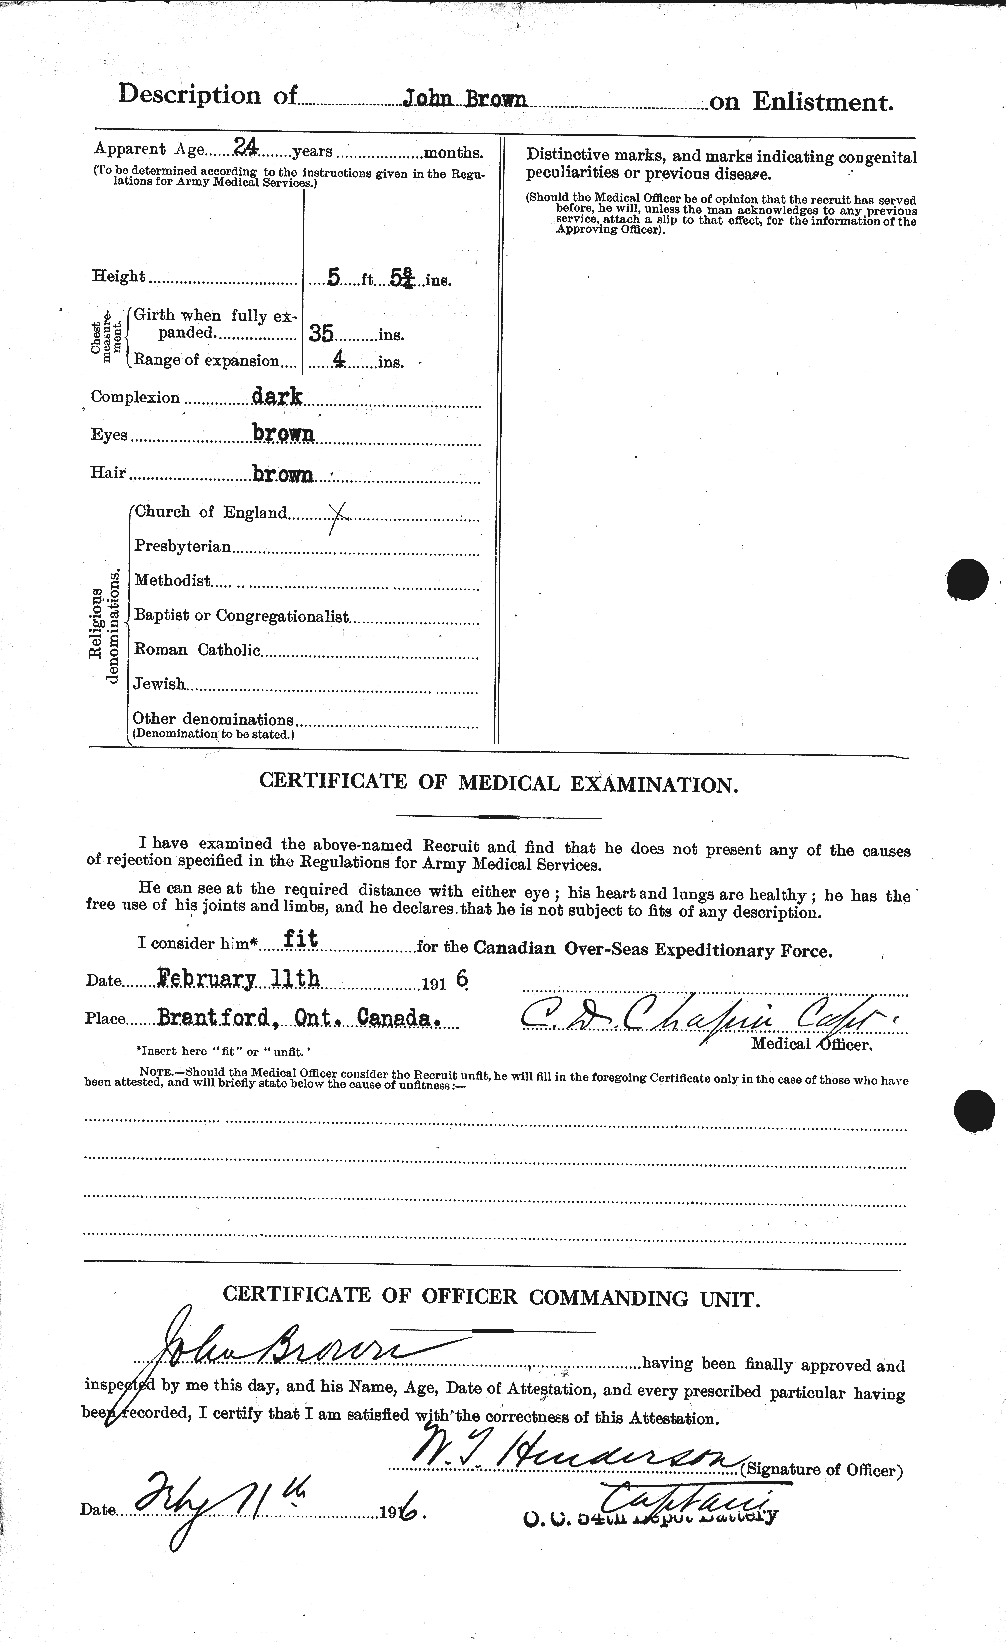 Personnel Records of the First World War - CEF 263904b